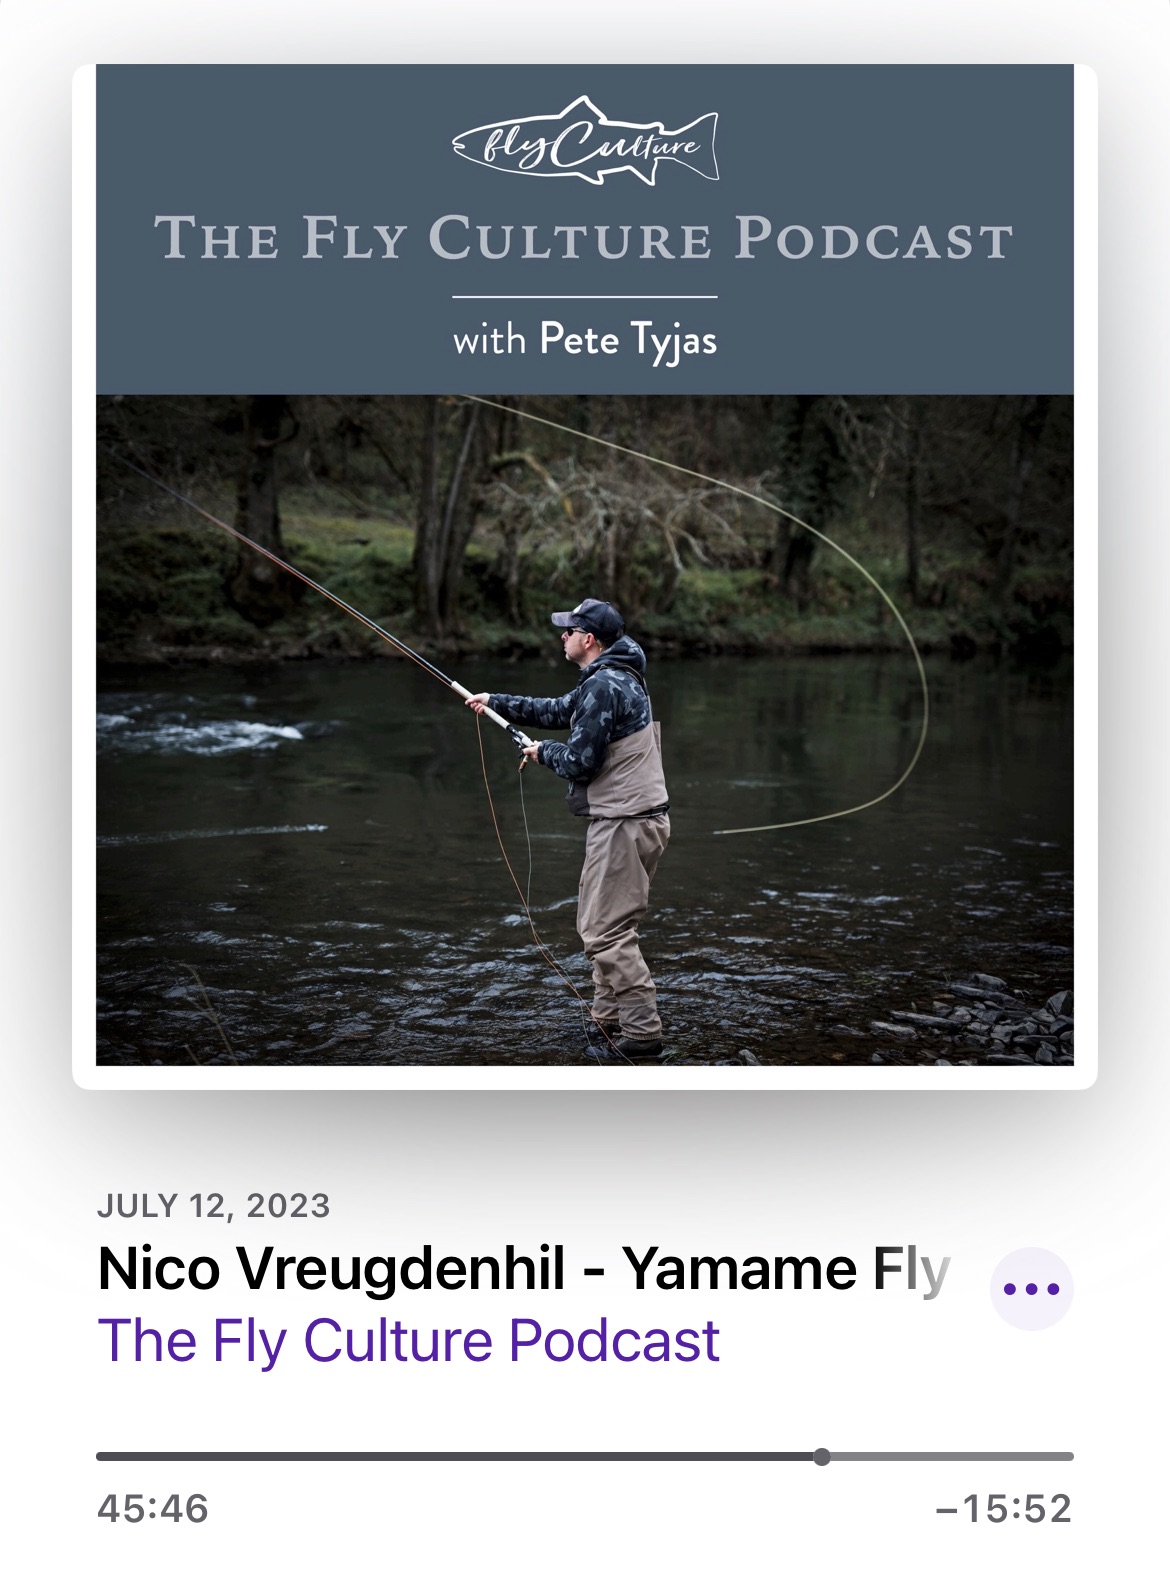 The Fiberglass Manifesto: FLY CULTURE - A Chat with Nico of Yamame